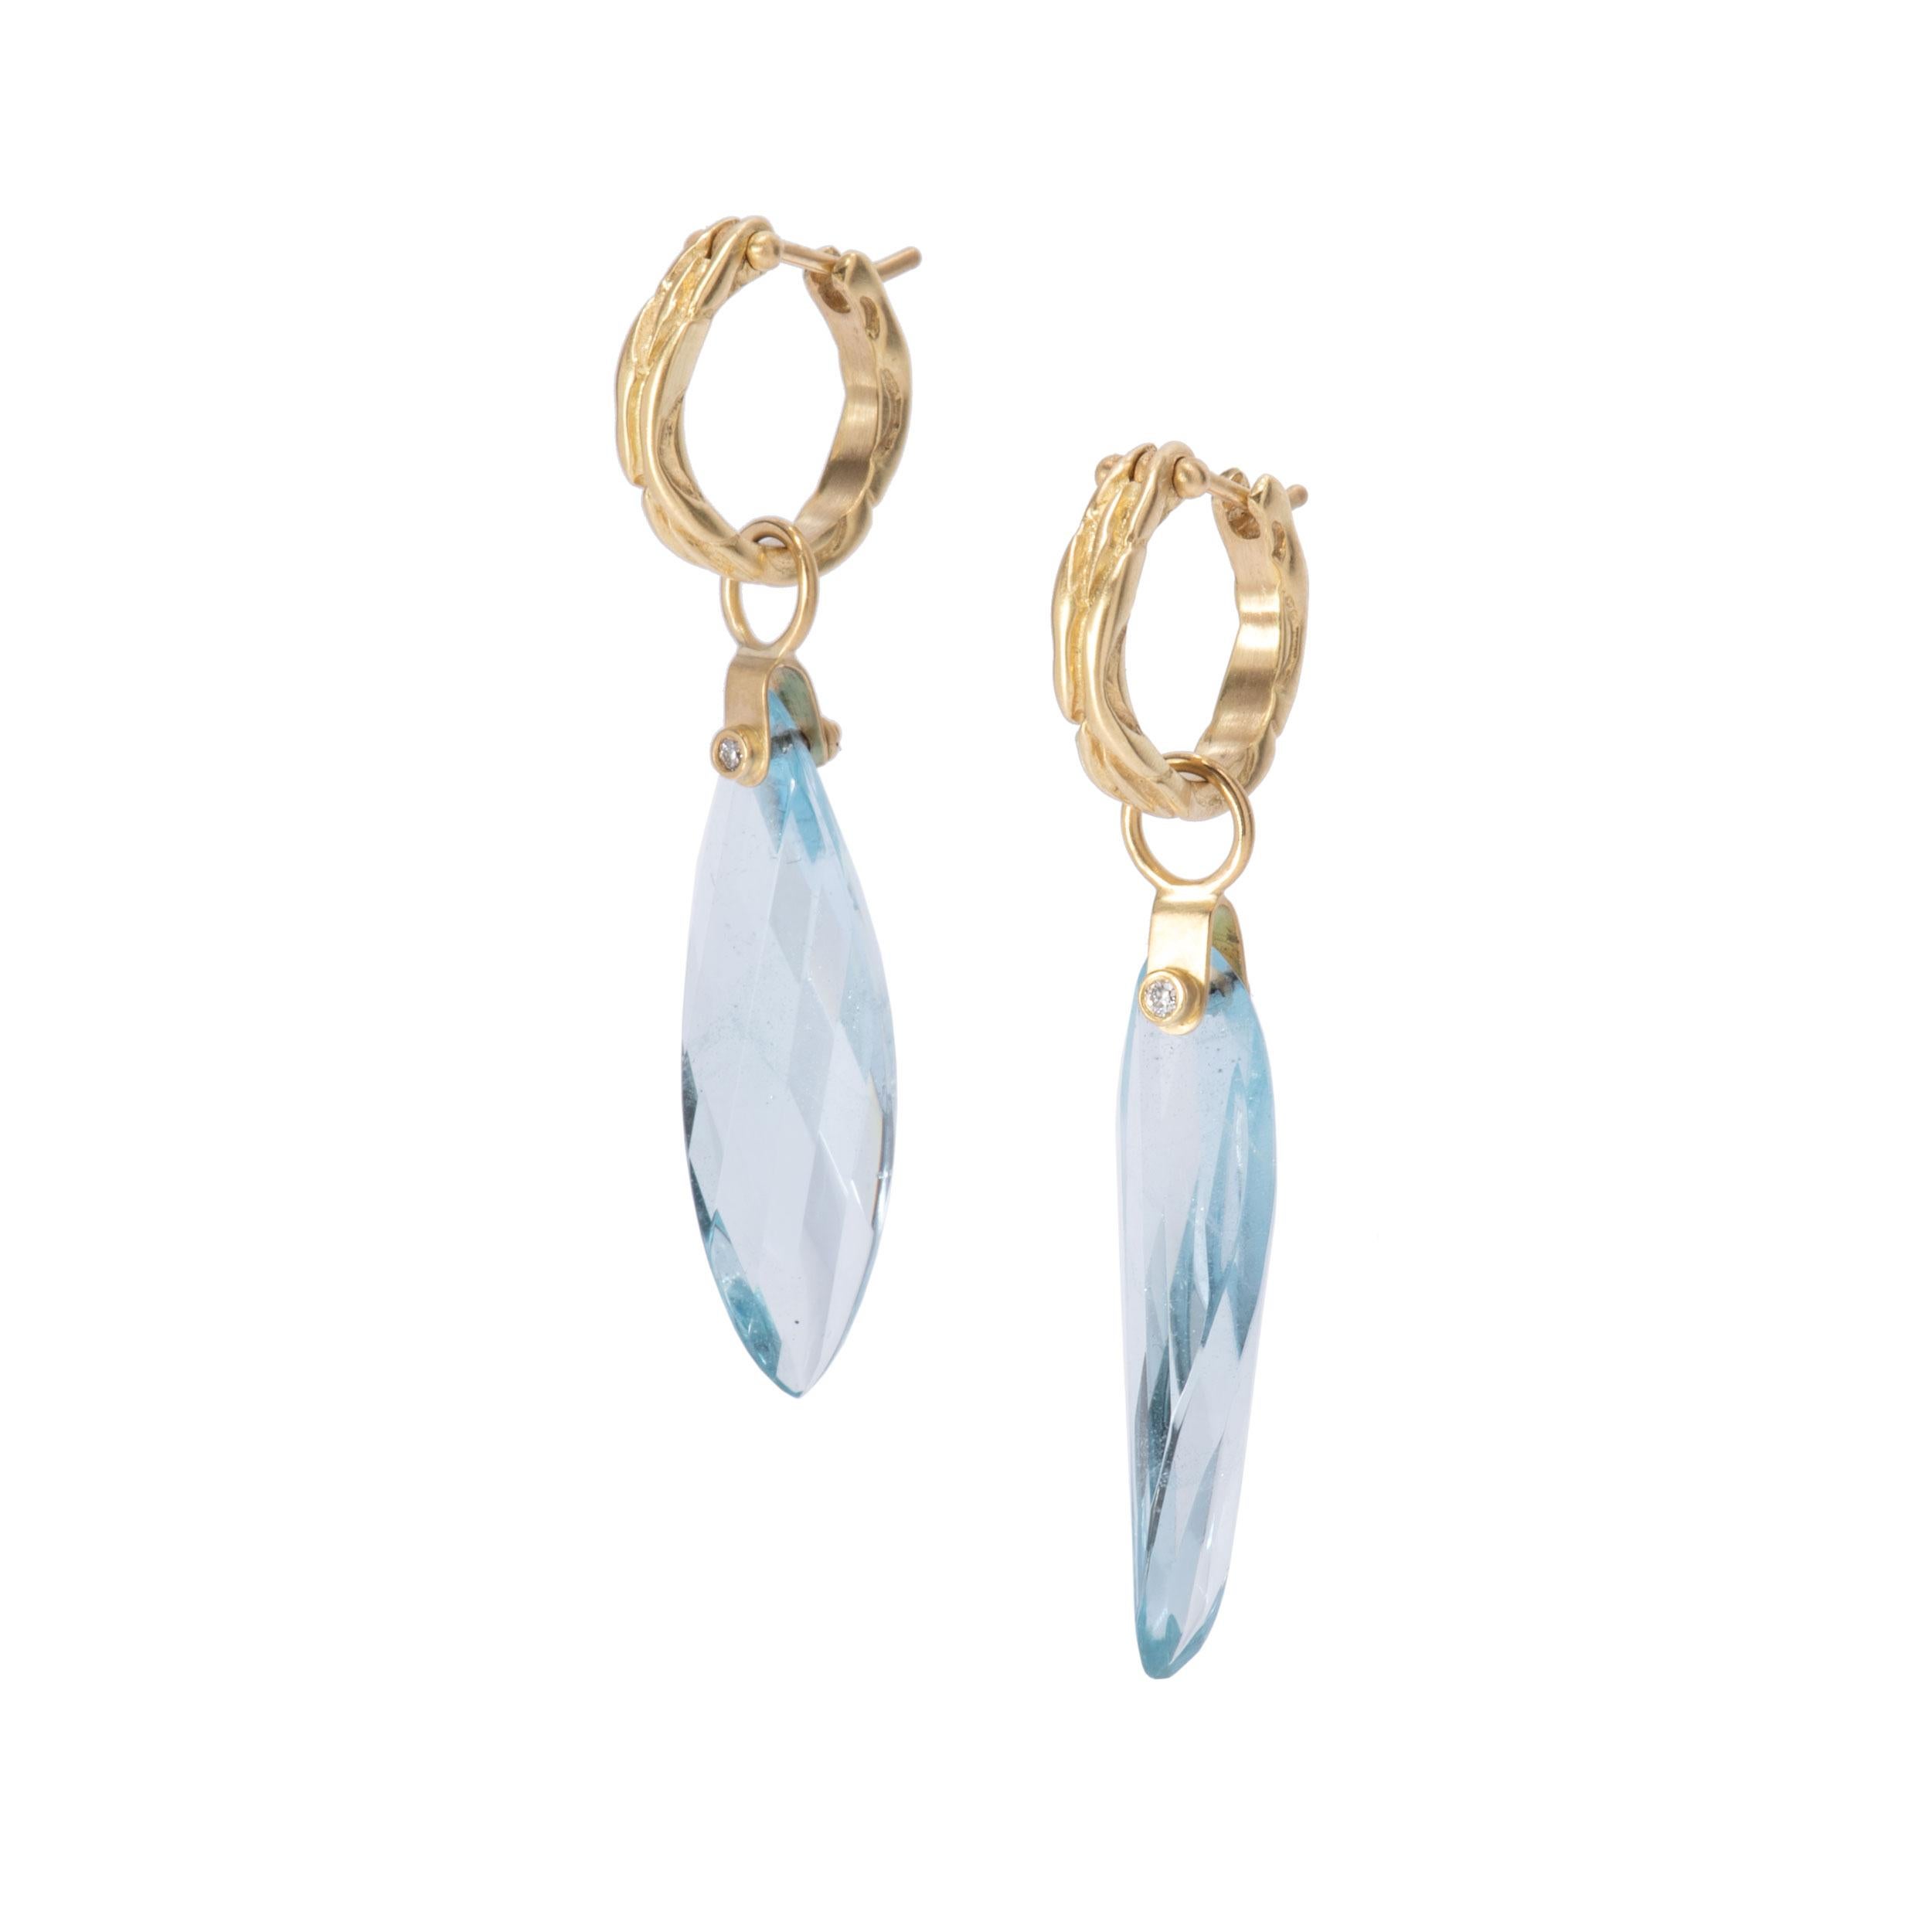 Blue Topaz Twisted Petal Drop Earrings in 18k gold are punctuated with .04ctw diamonds on stirrup mounts. Facets reflect twinkle and shadows in these blue topaz drops and the curved or twisted cut enhances the catch of light. Blue topaz petal drops